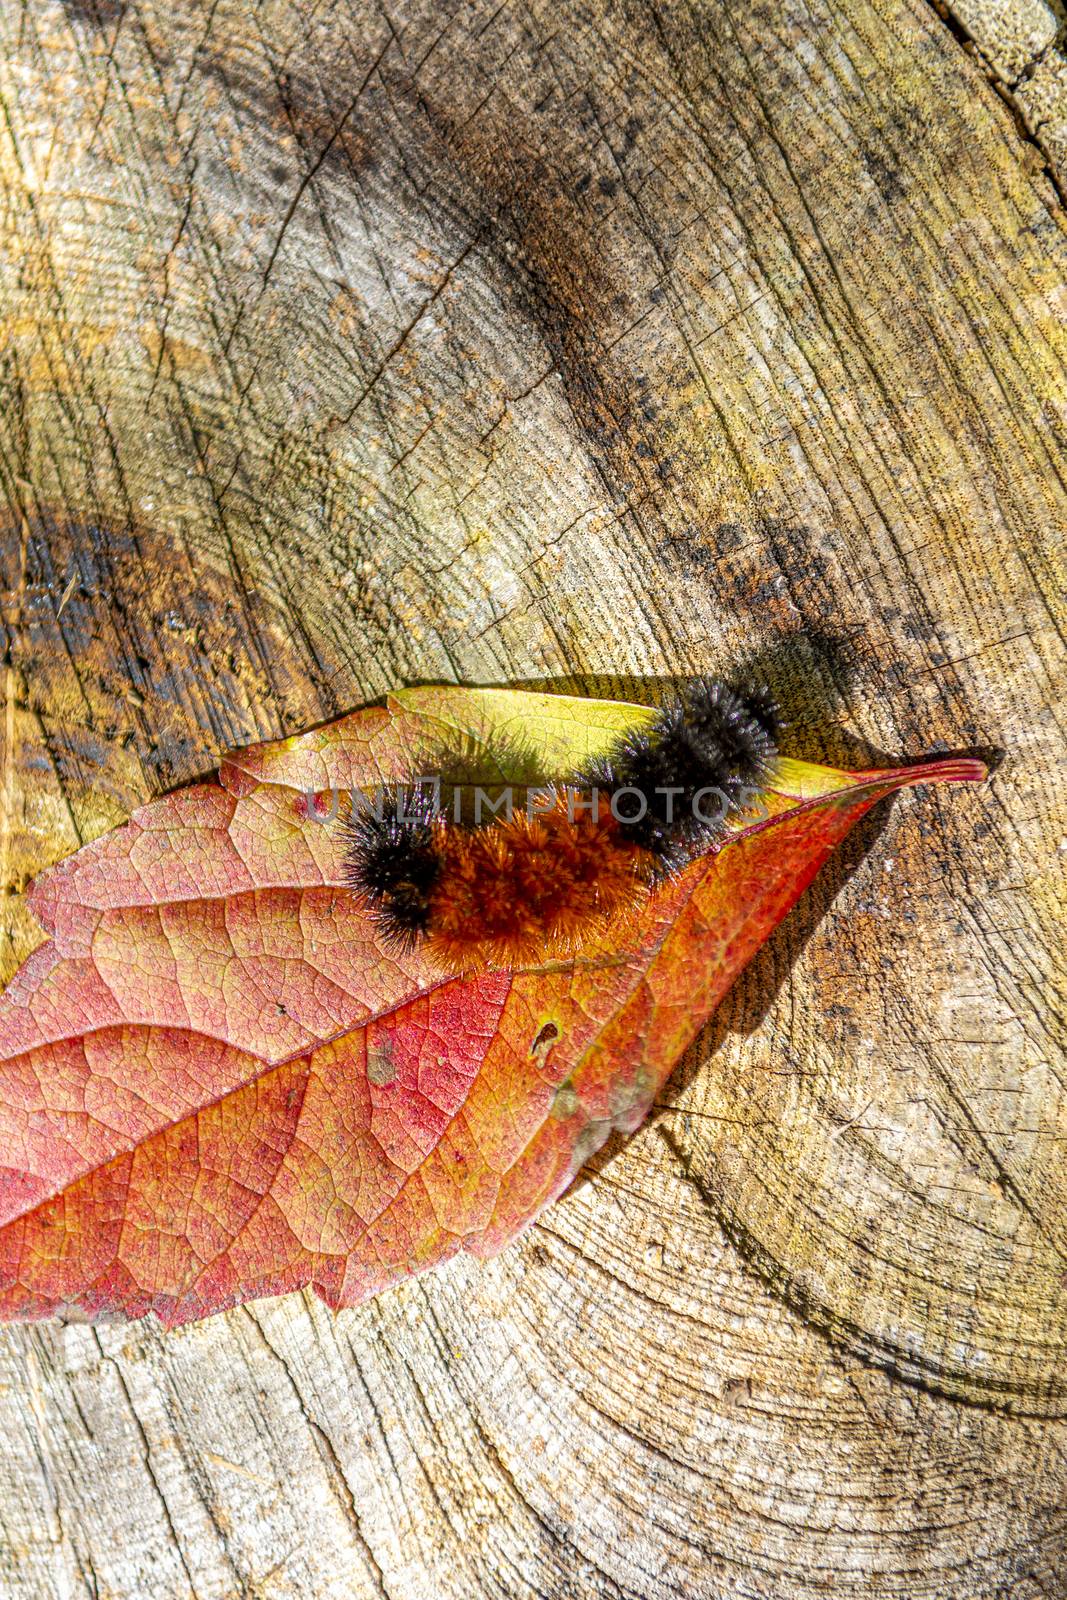 Striped caterpillar on a red, autumn leaf by ben44